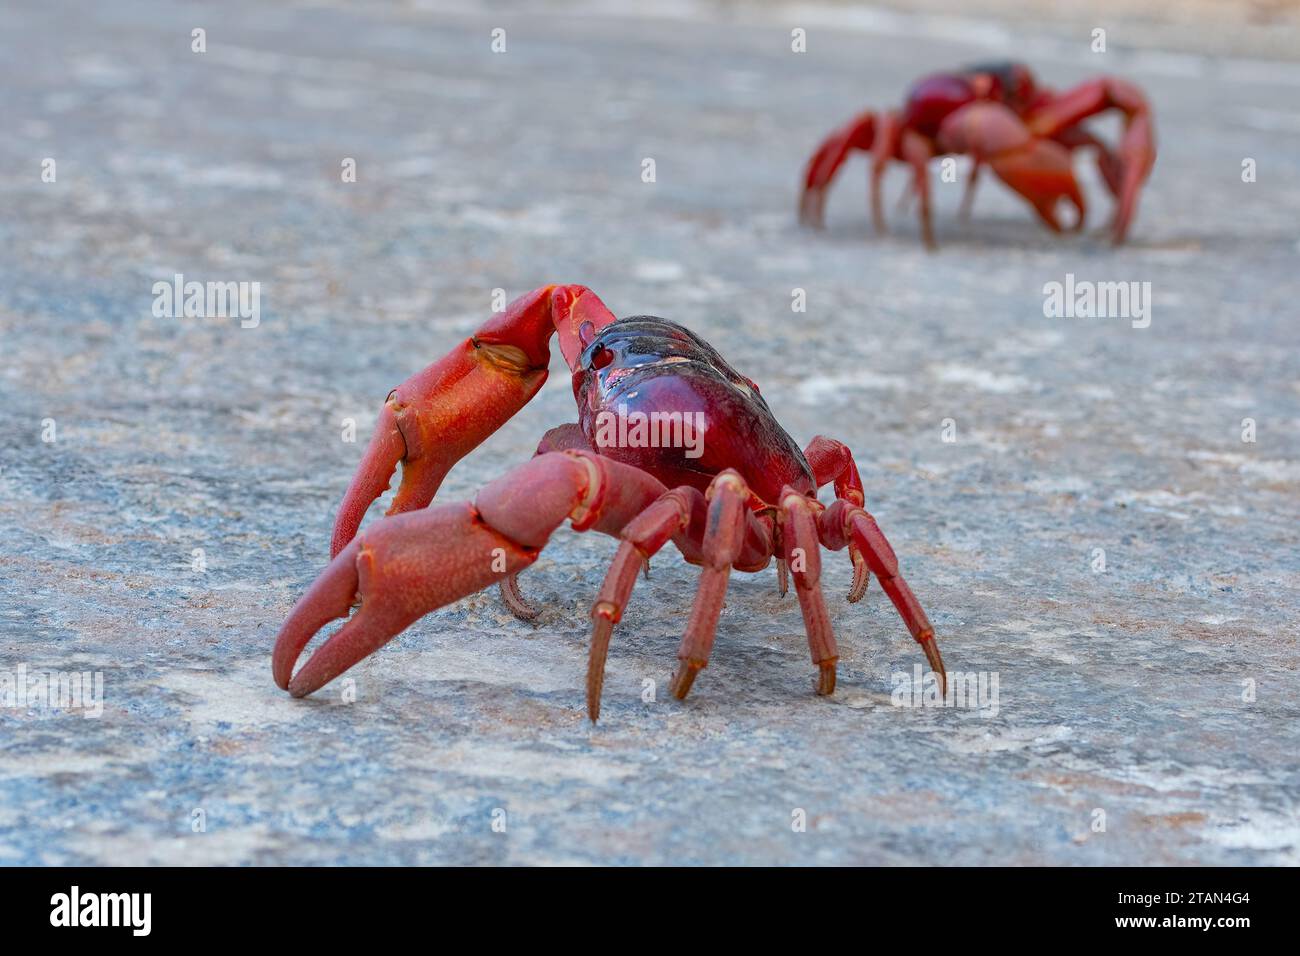 Red Crabs (Gecarcoidea natalis) on the move during their annual migration, Christmas Island, Australia Stock Photo